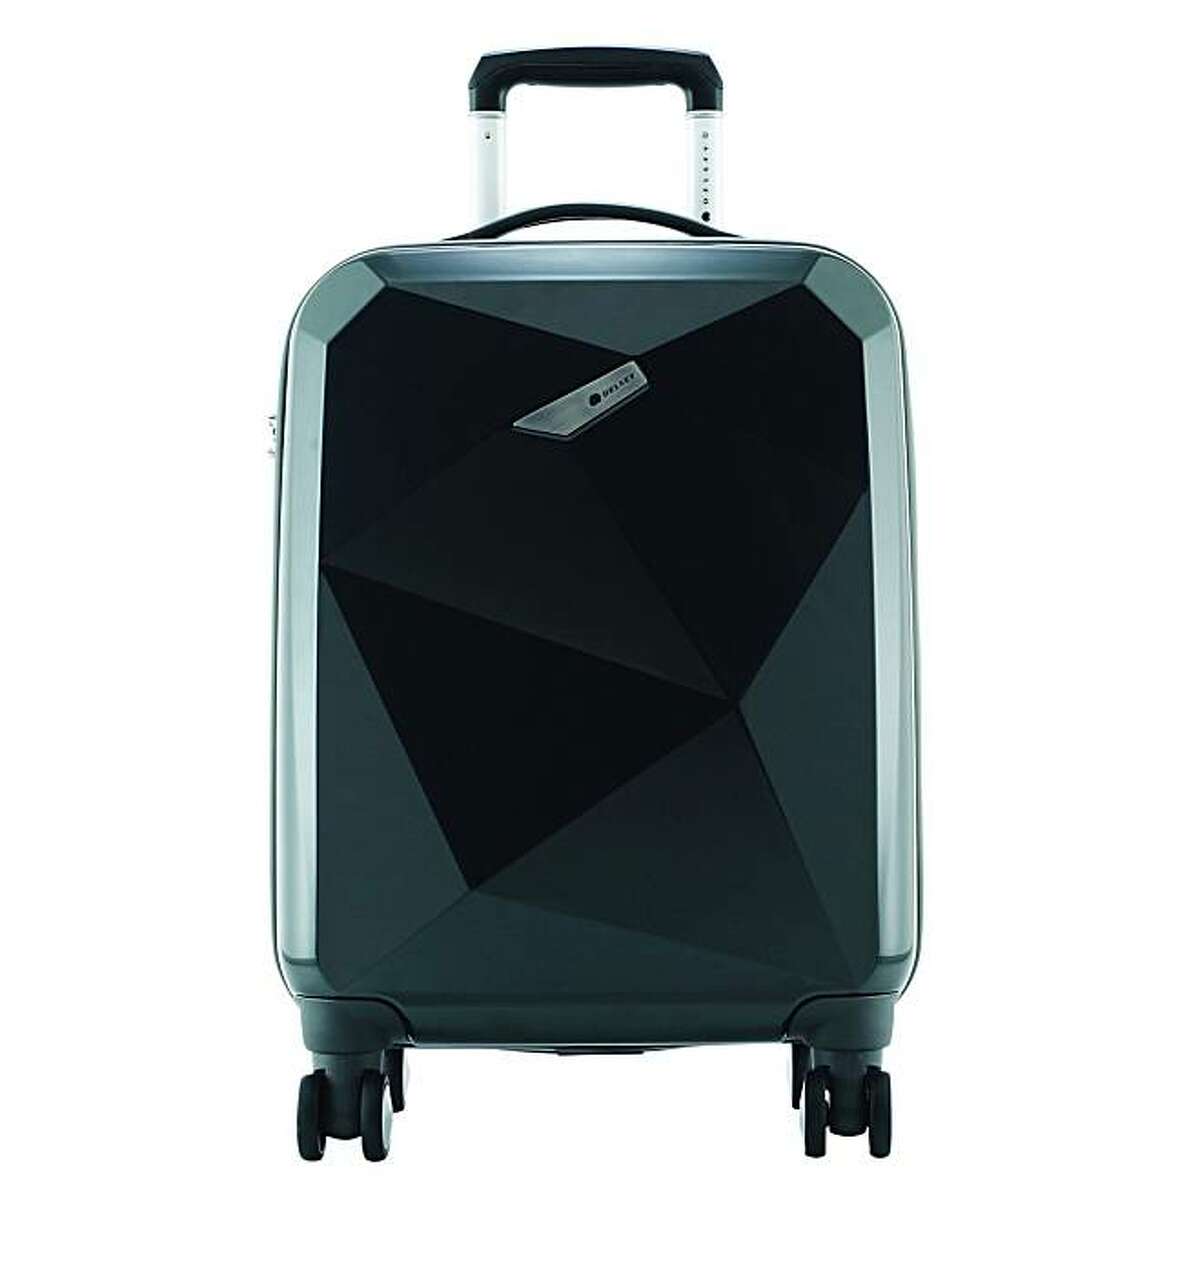 A lightweight polycarbonate suitcase by Delsey Karat, with innovative wheel system inspired by aircraft landing gear and tested over 30 km of demanding surfaces. 21.5” Carry-on Trolley Case- $199.99 25.5” Trolley Case $249.99 30” Trolley Case $299.99